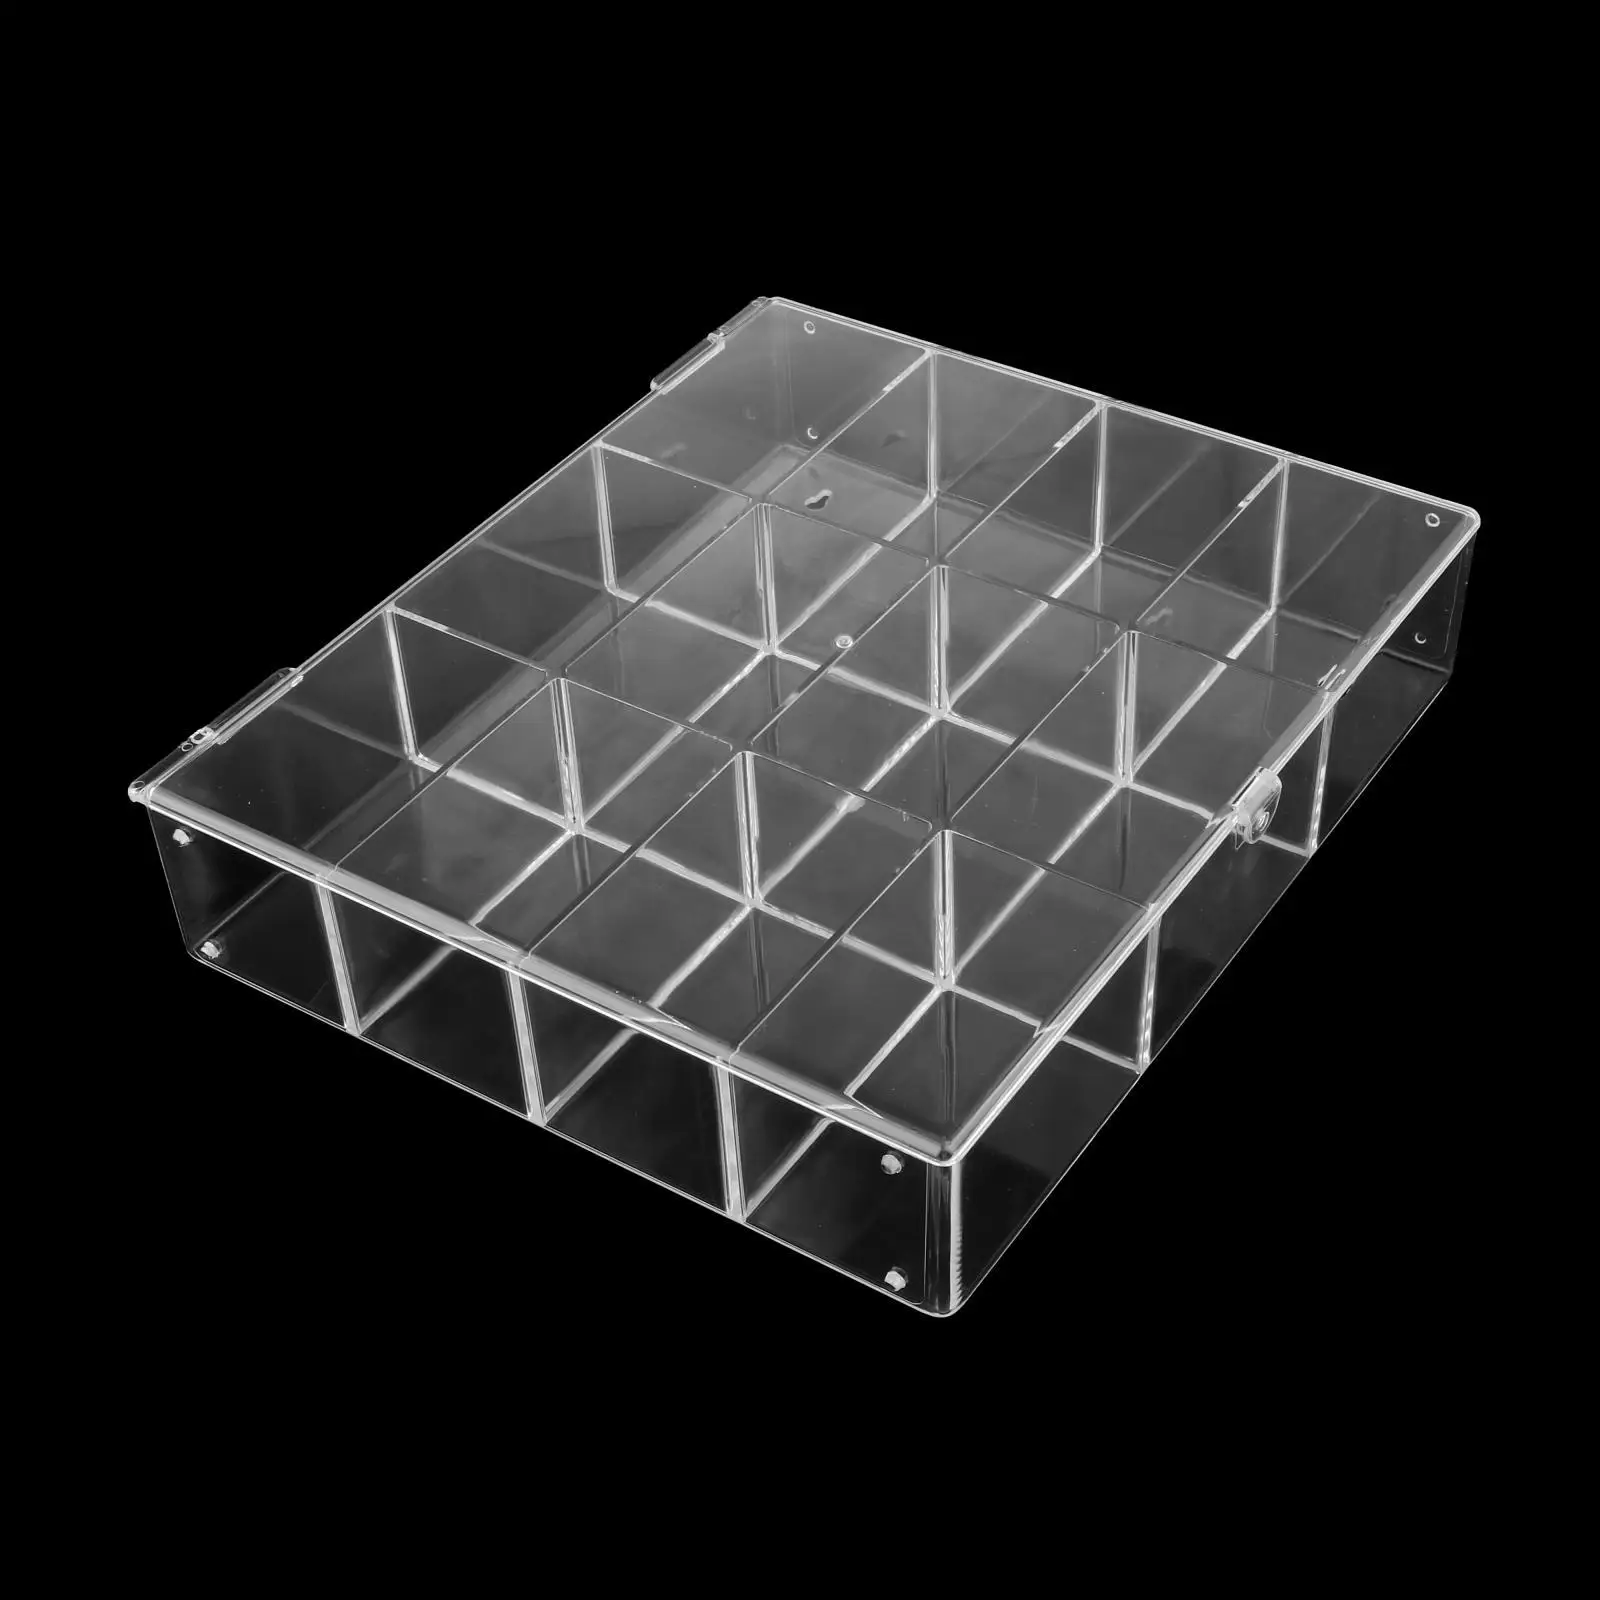 Transparent Acrylic Display Storage Case ShowCase Dustproof for Garage Doll Model Figures Small Collectibles Toys